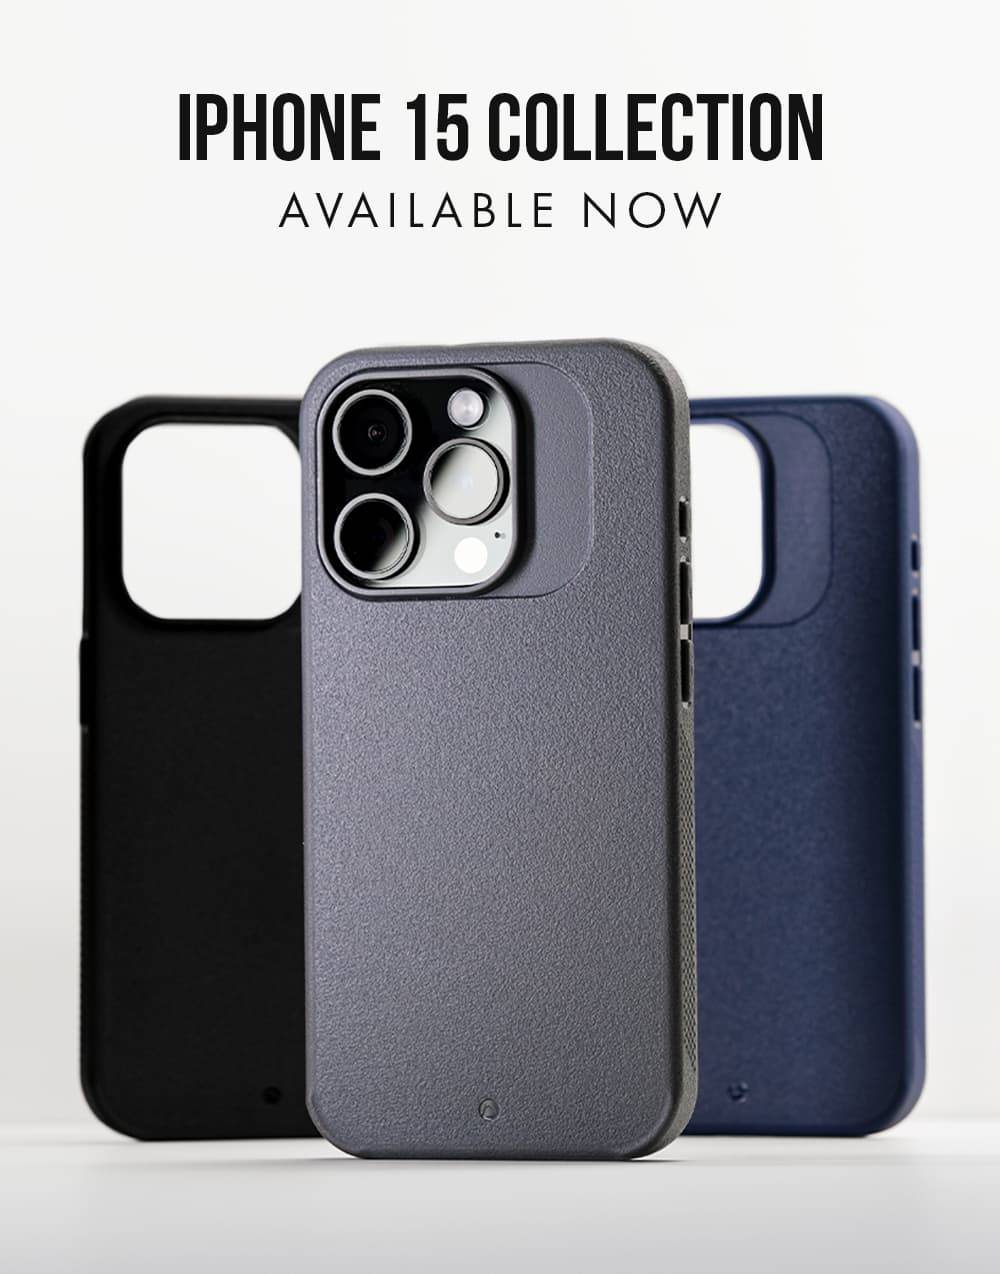 IPHONE 15 COLLECTION AVAILABLE NOW